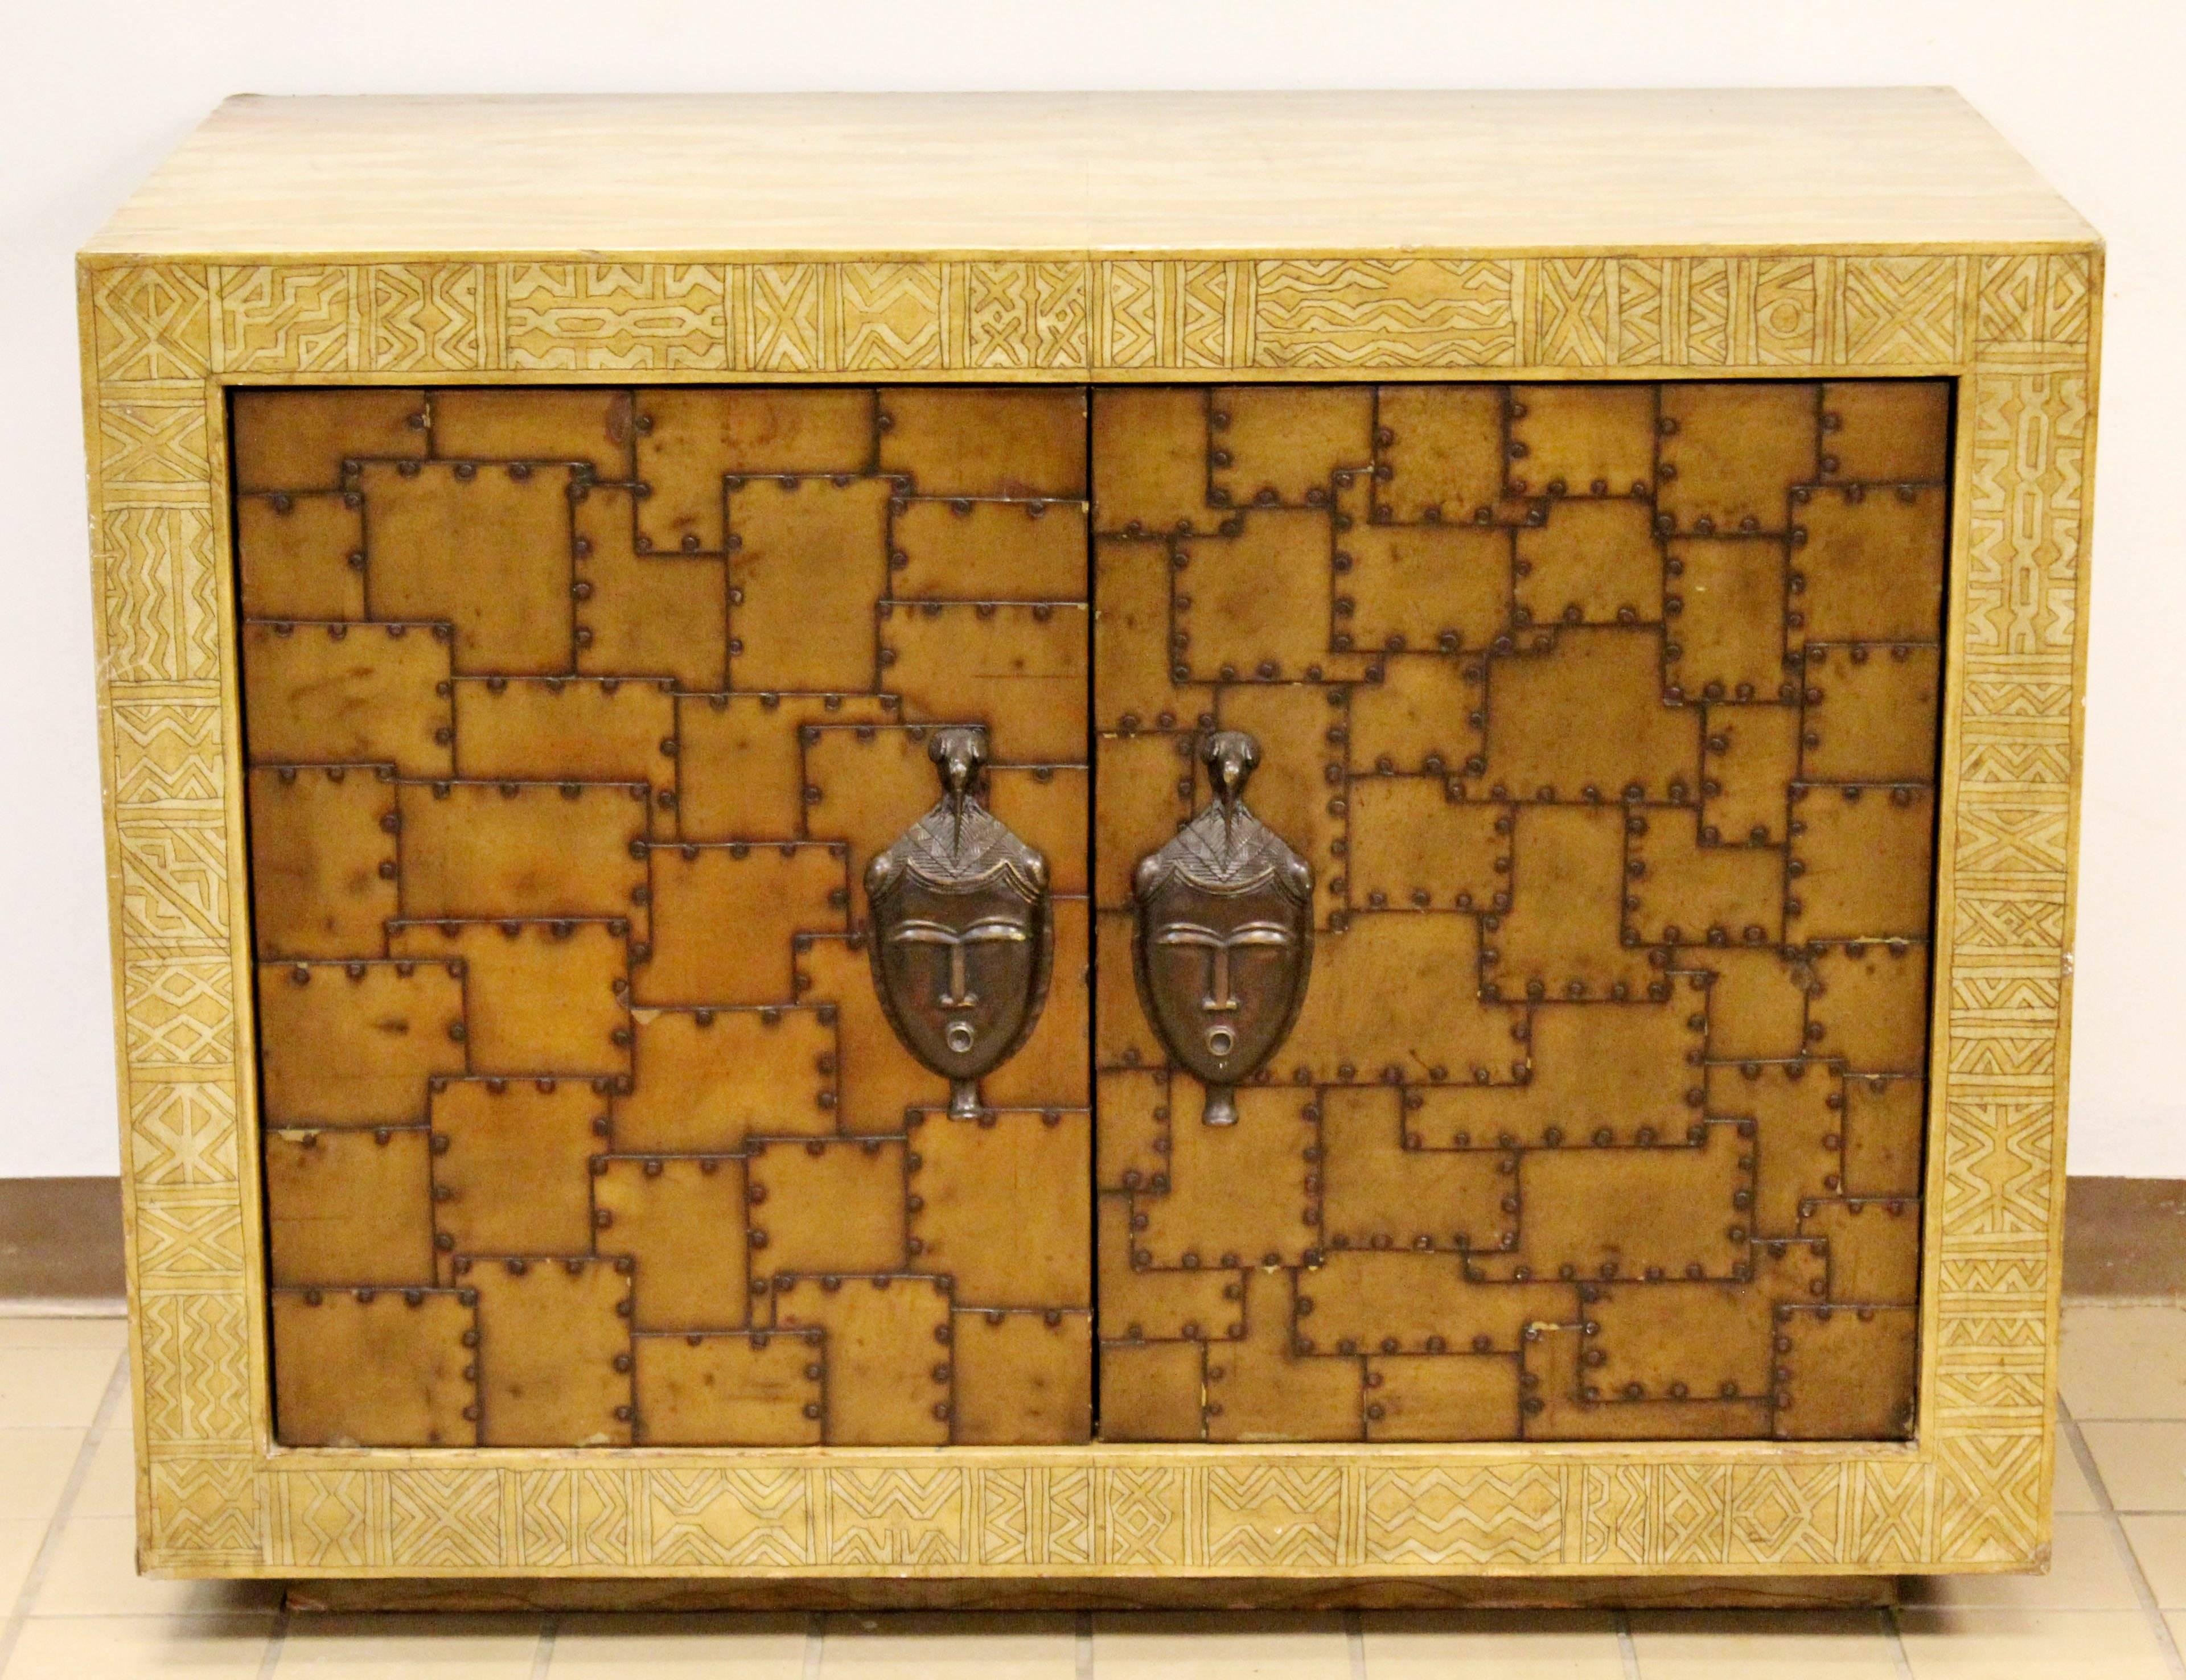 For your consideration is a phenomenally unique, Asian inspired, bronze and painted leather, small credenza or large chest, circa the 1970s. In excellent condition on the outside. The inside has been fitted with an electrical outlet, and has some